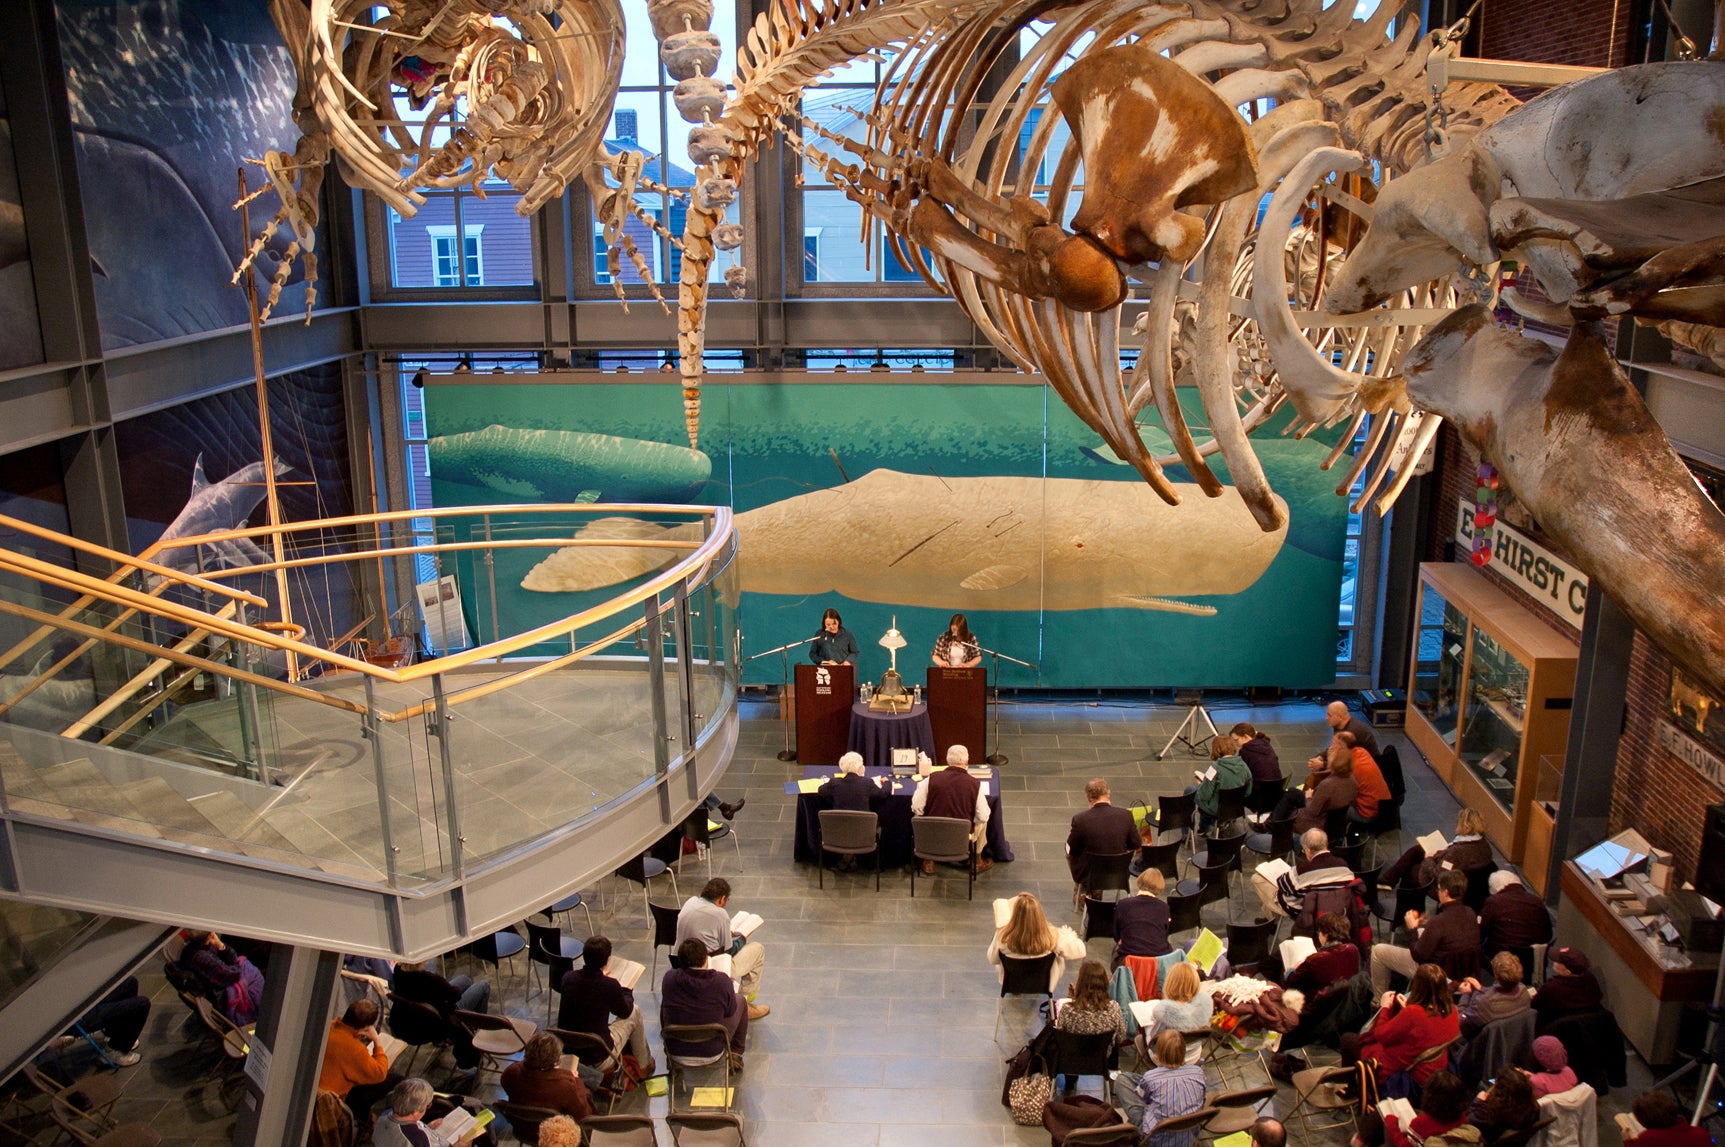 Moby dick museam in massachusetts